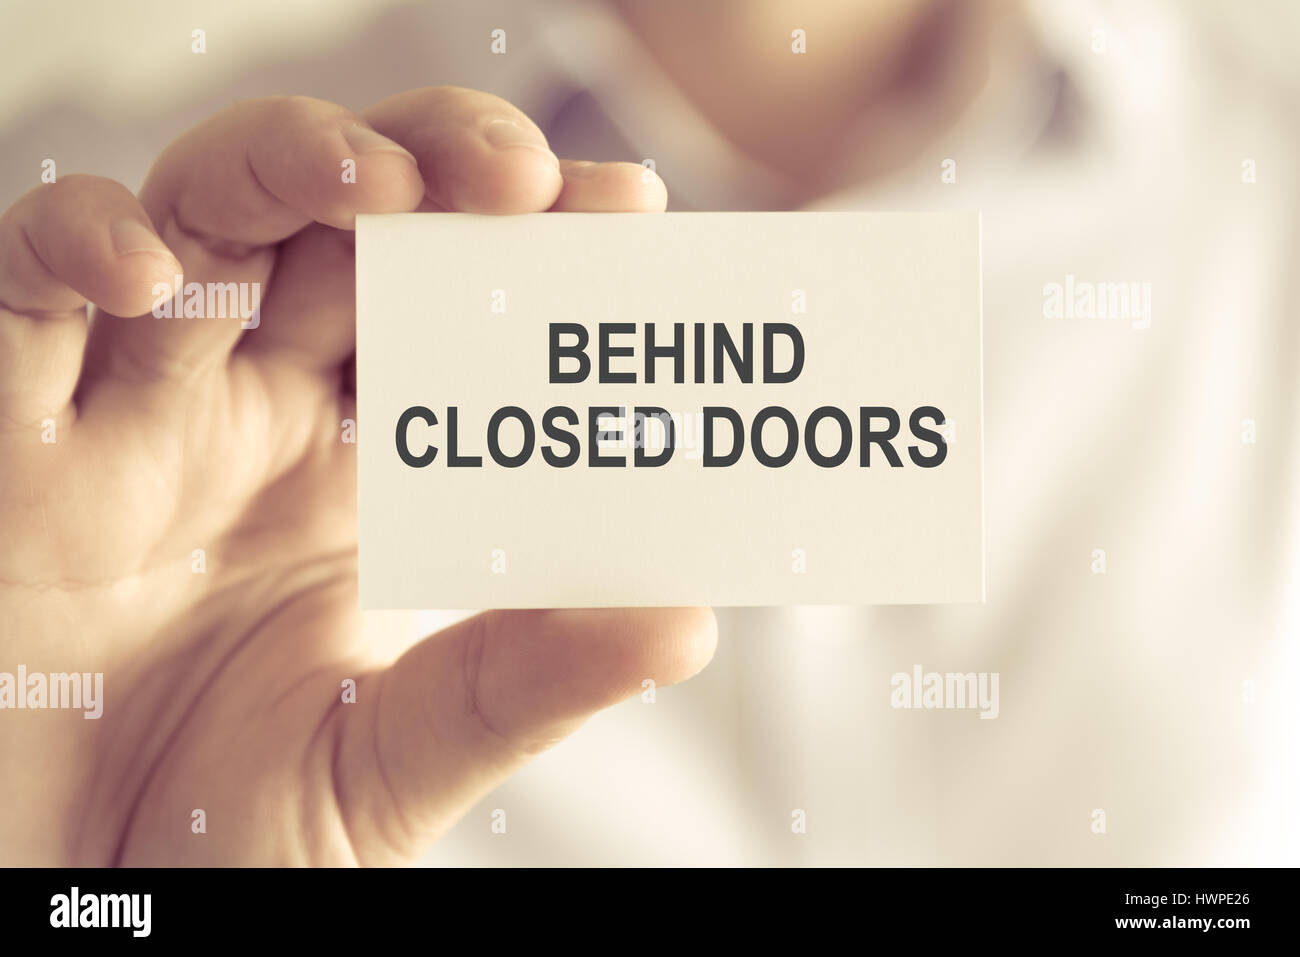 Closeup on businessman holding a card with text BEHIND CLOSED DOORS, business concept image with soft focus background and vintage tone Stock Photo